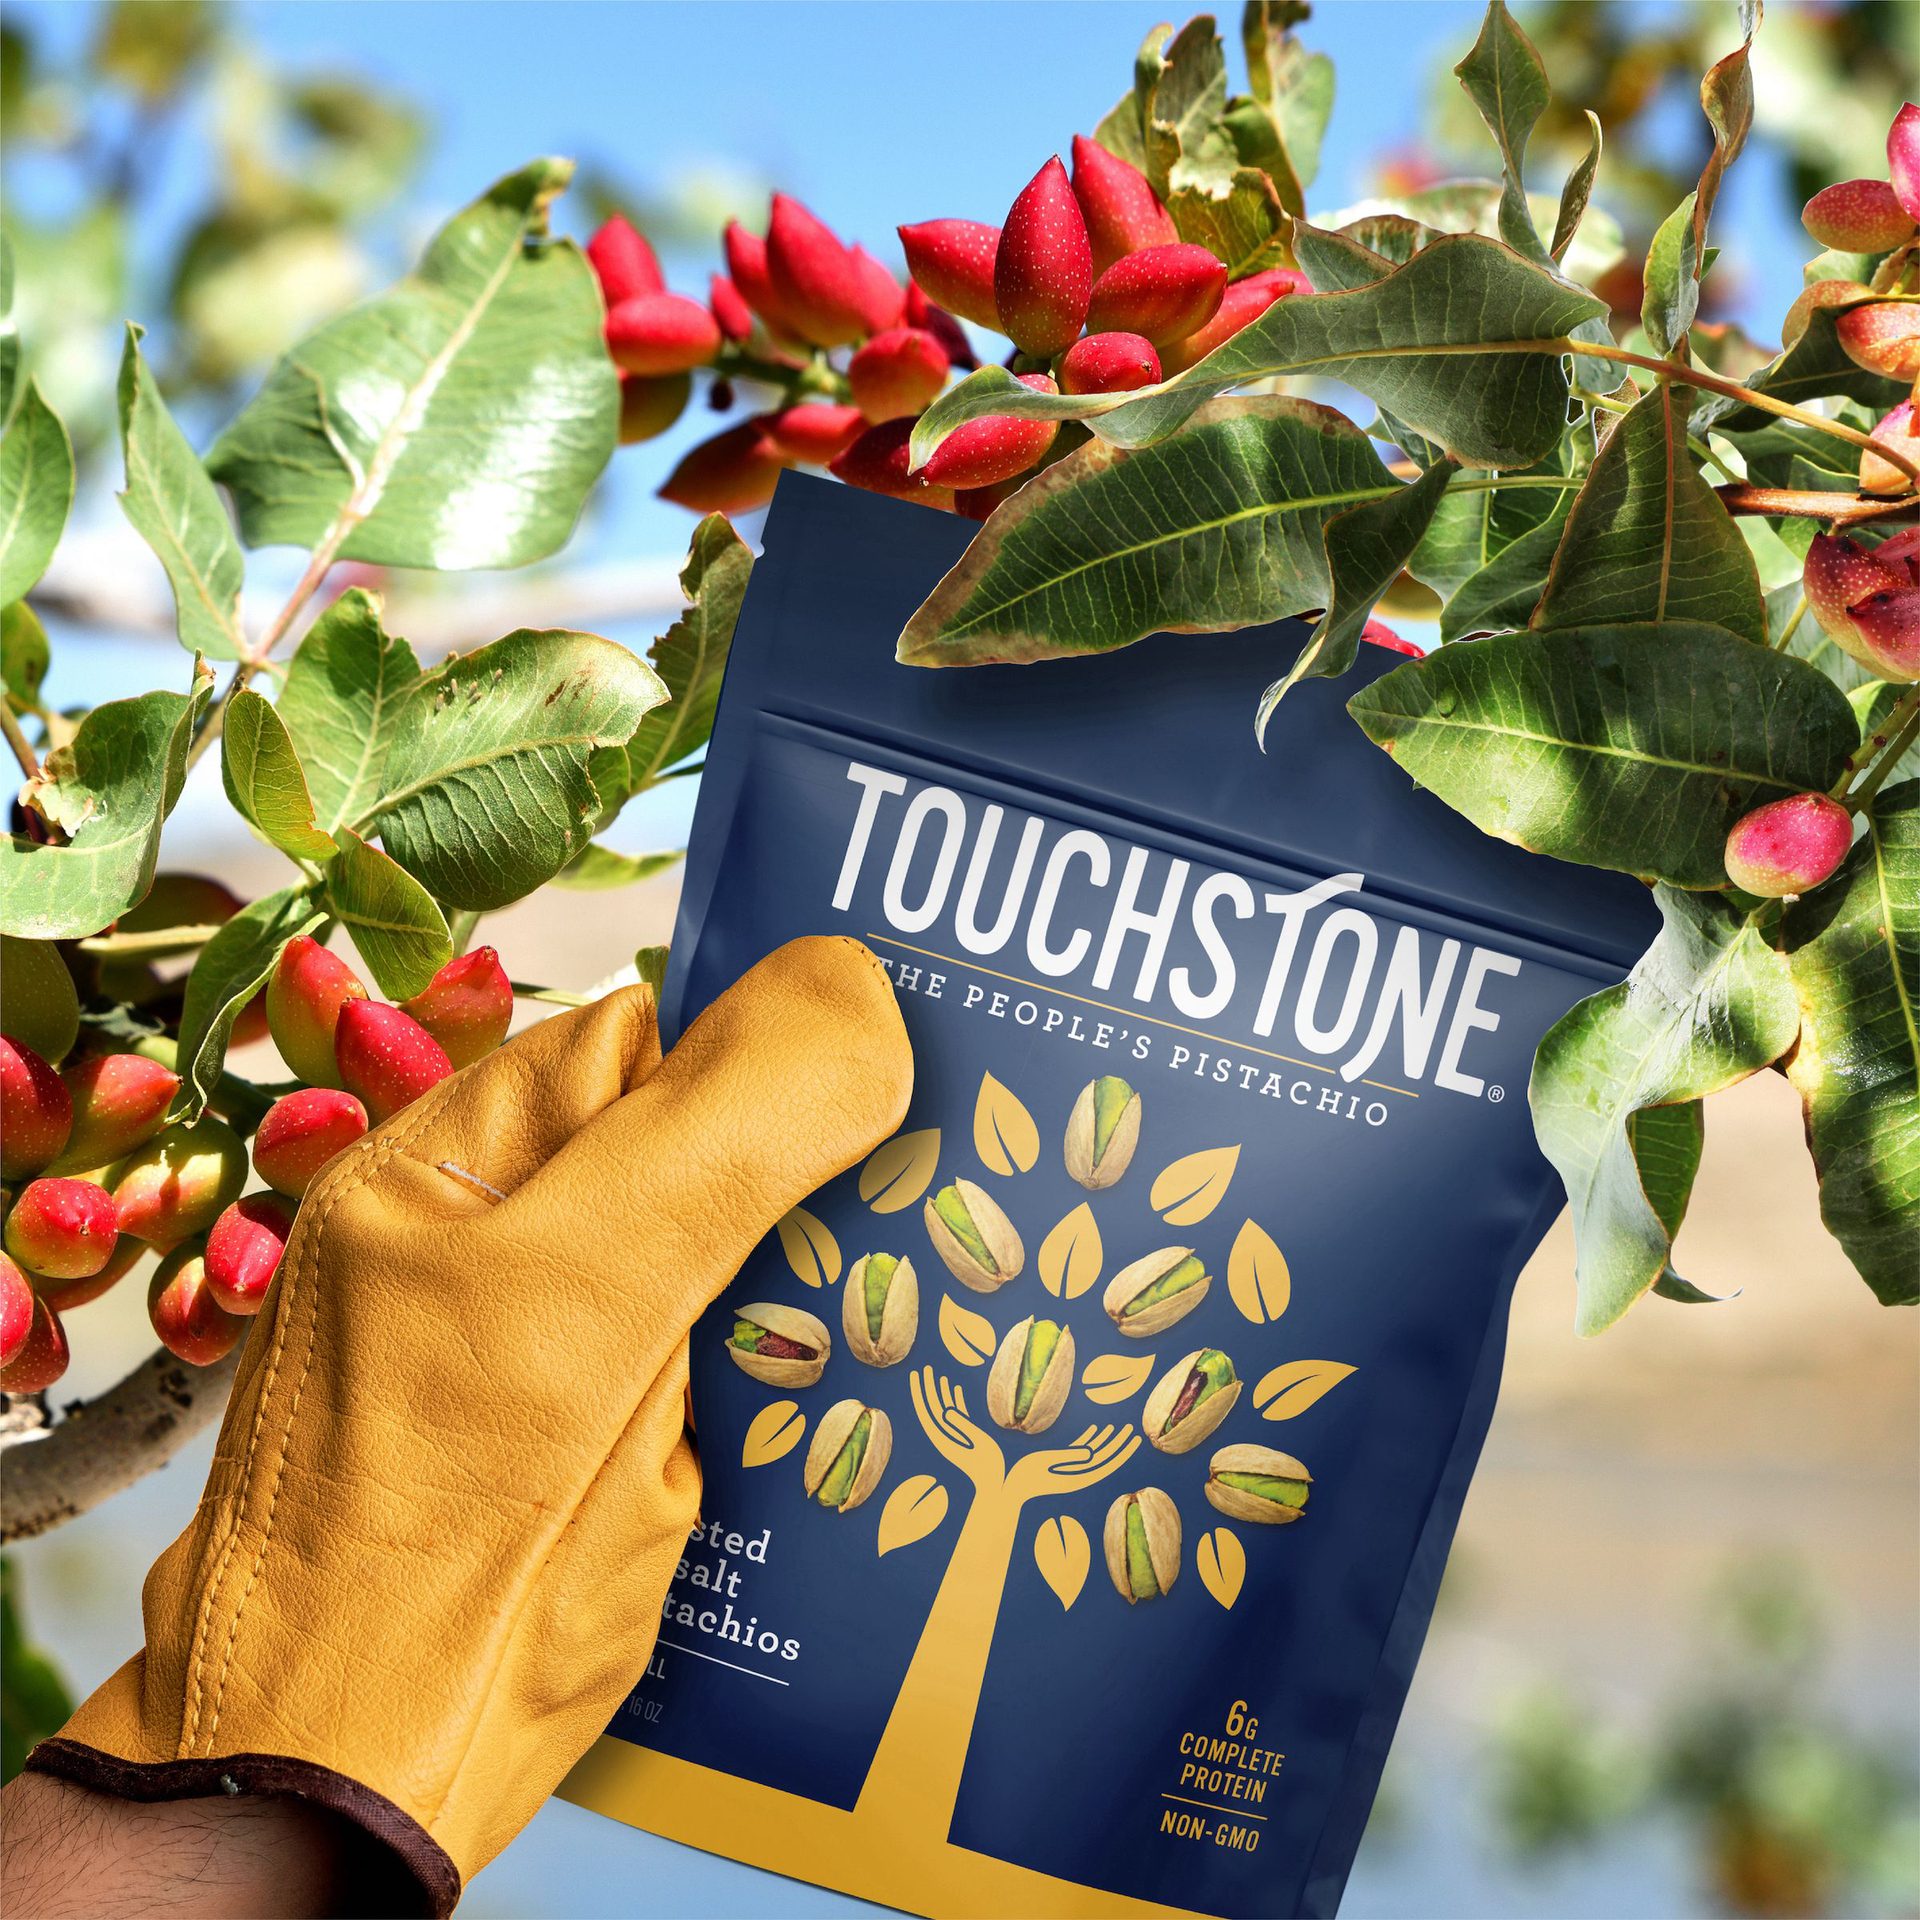 Touchstone Packaging Growing On Tree